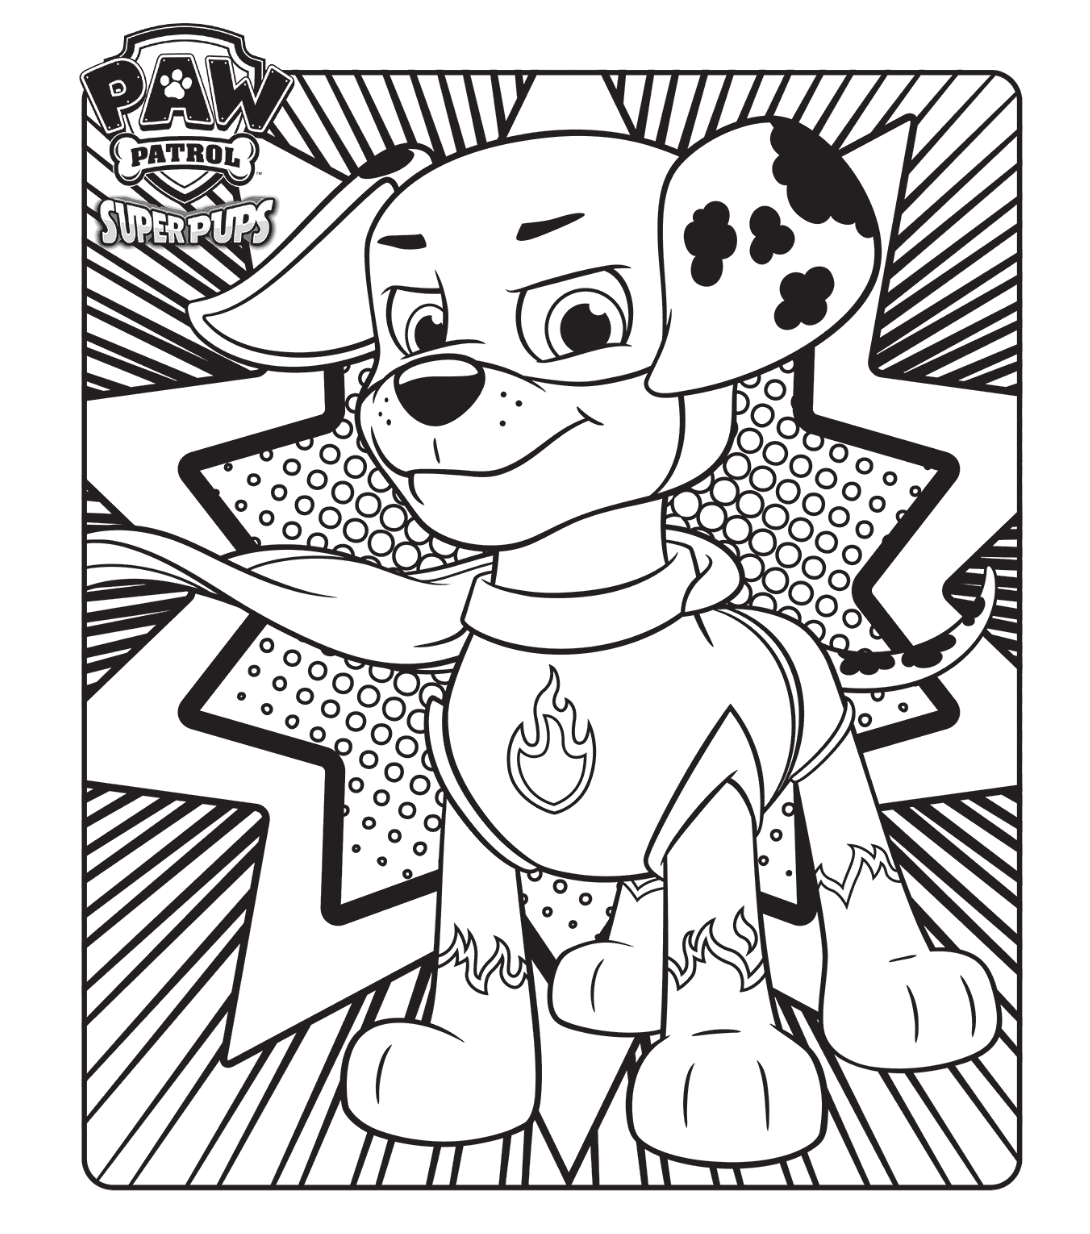 PAW Patrol Super Pups Colouring Page | Paw patrol coloring, Paw ...